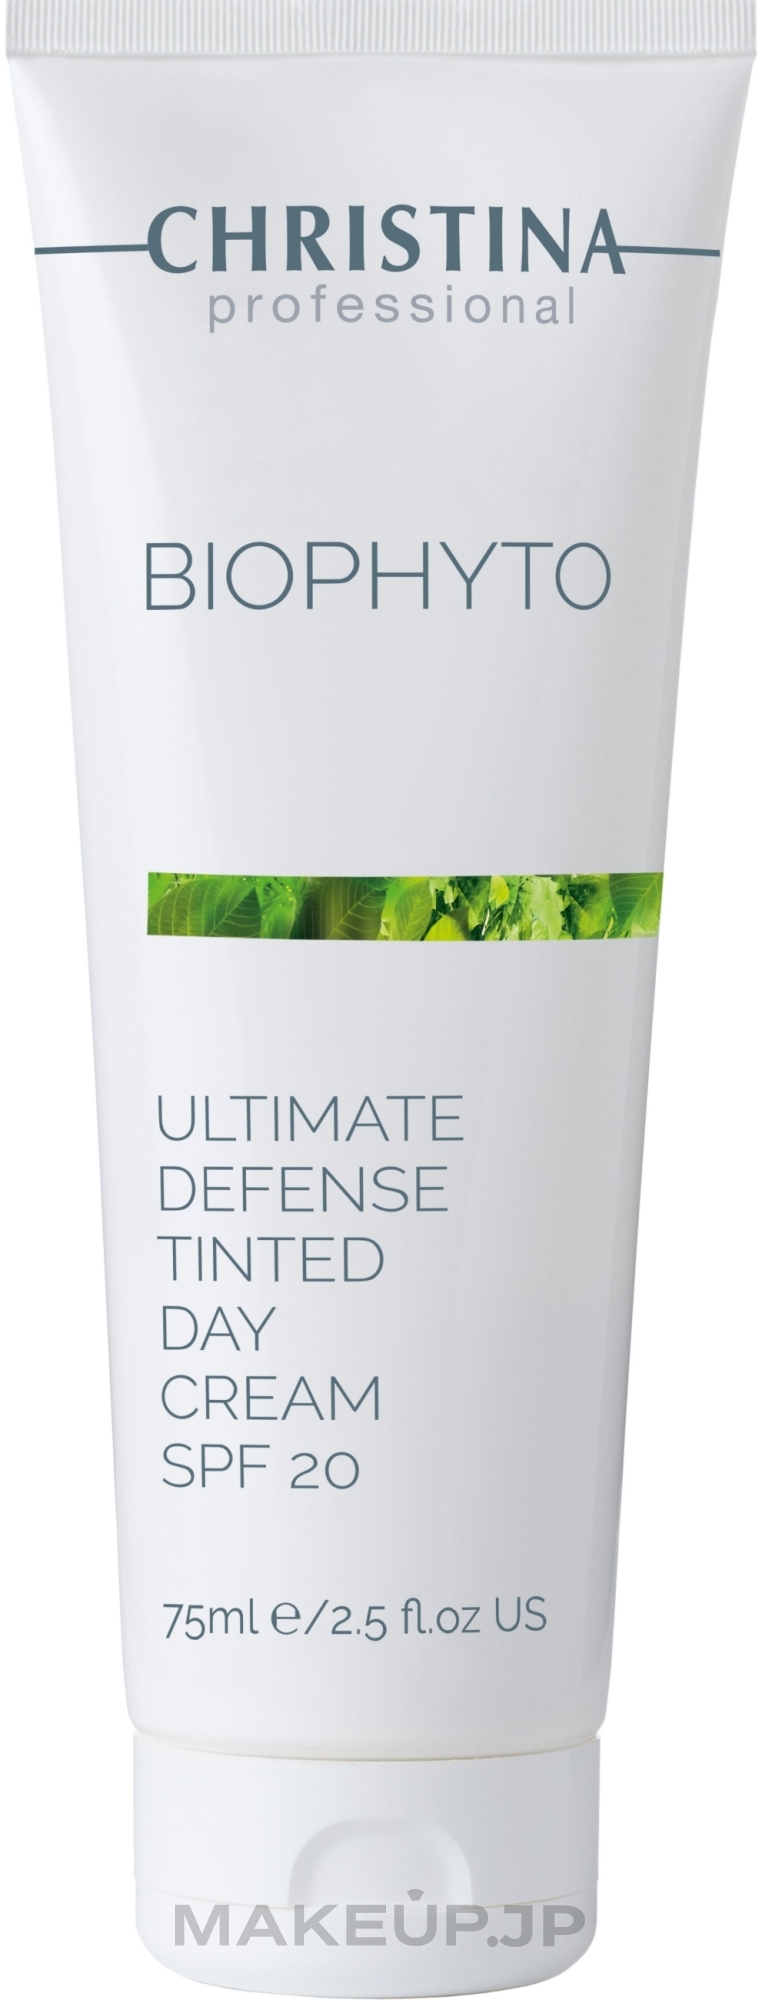 Tinted Day Cream "Absolute Protection" - Christina Bio Phyto Ultimate Defense Tinted Day Cream SPF 20 — photo 75 ml